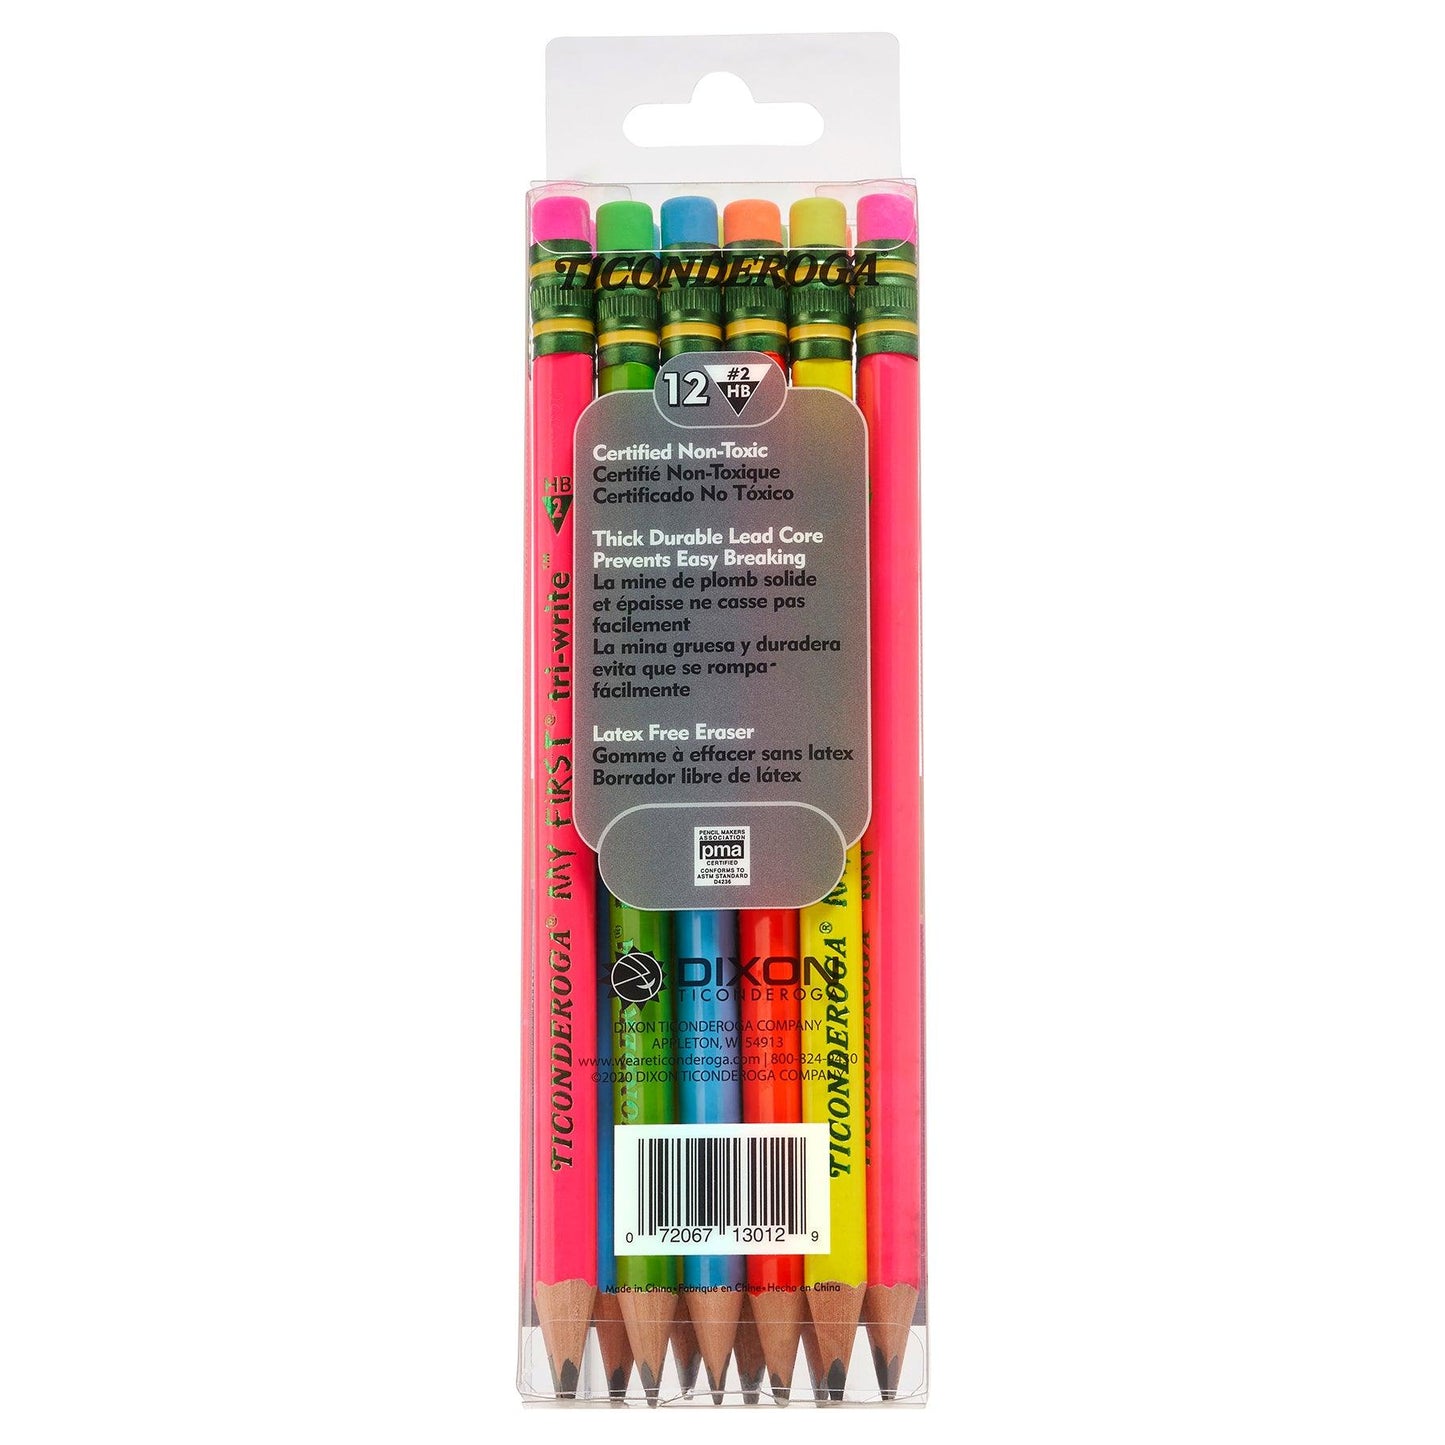 My First® Tri-Write™ Wood-Cased Pencils, Neon Assorted, 12 Per Pack, 2 Packs - Loomini